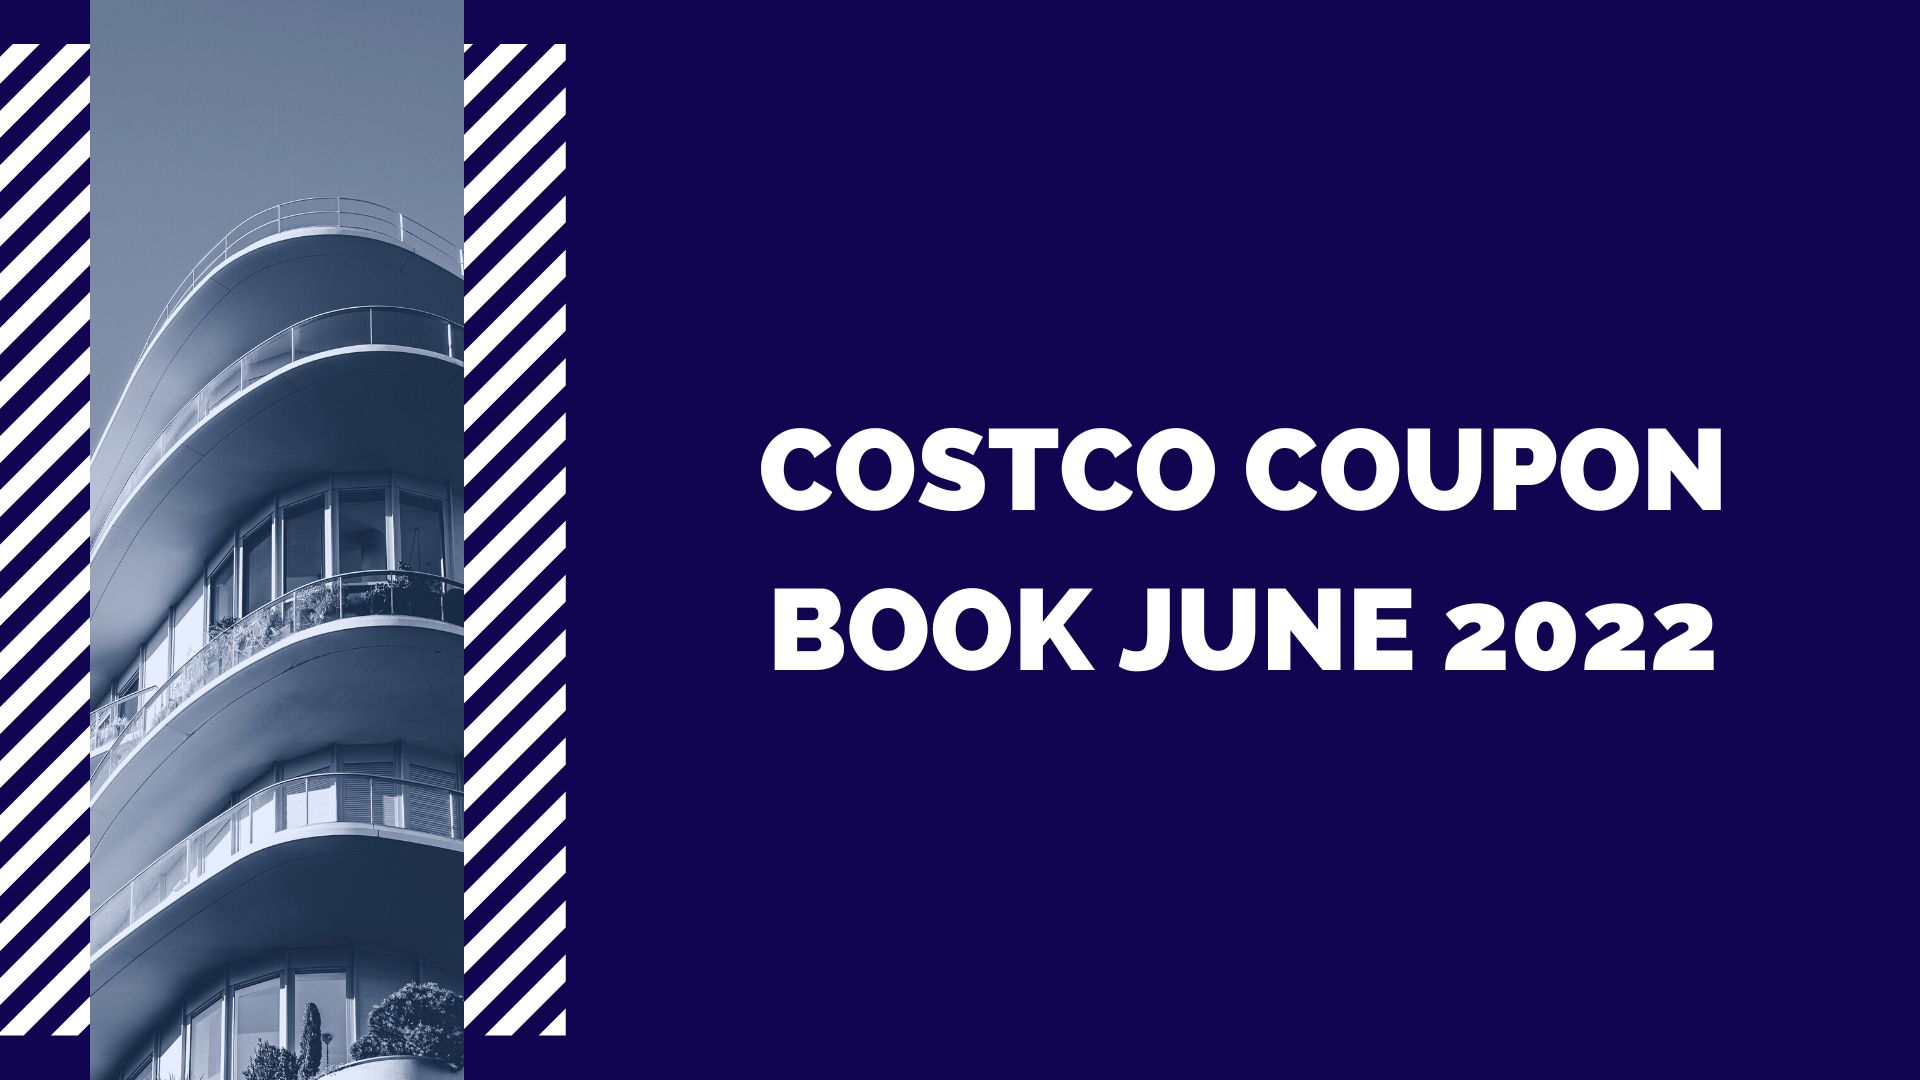 costco-coupon-book-june-2022-june-check-the-latest-news-here